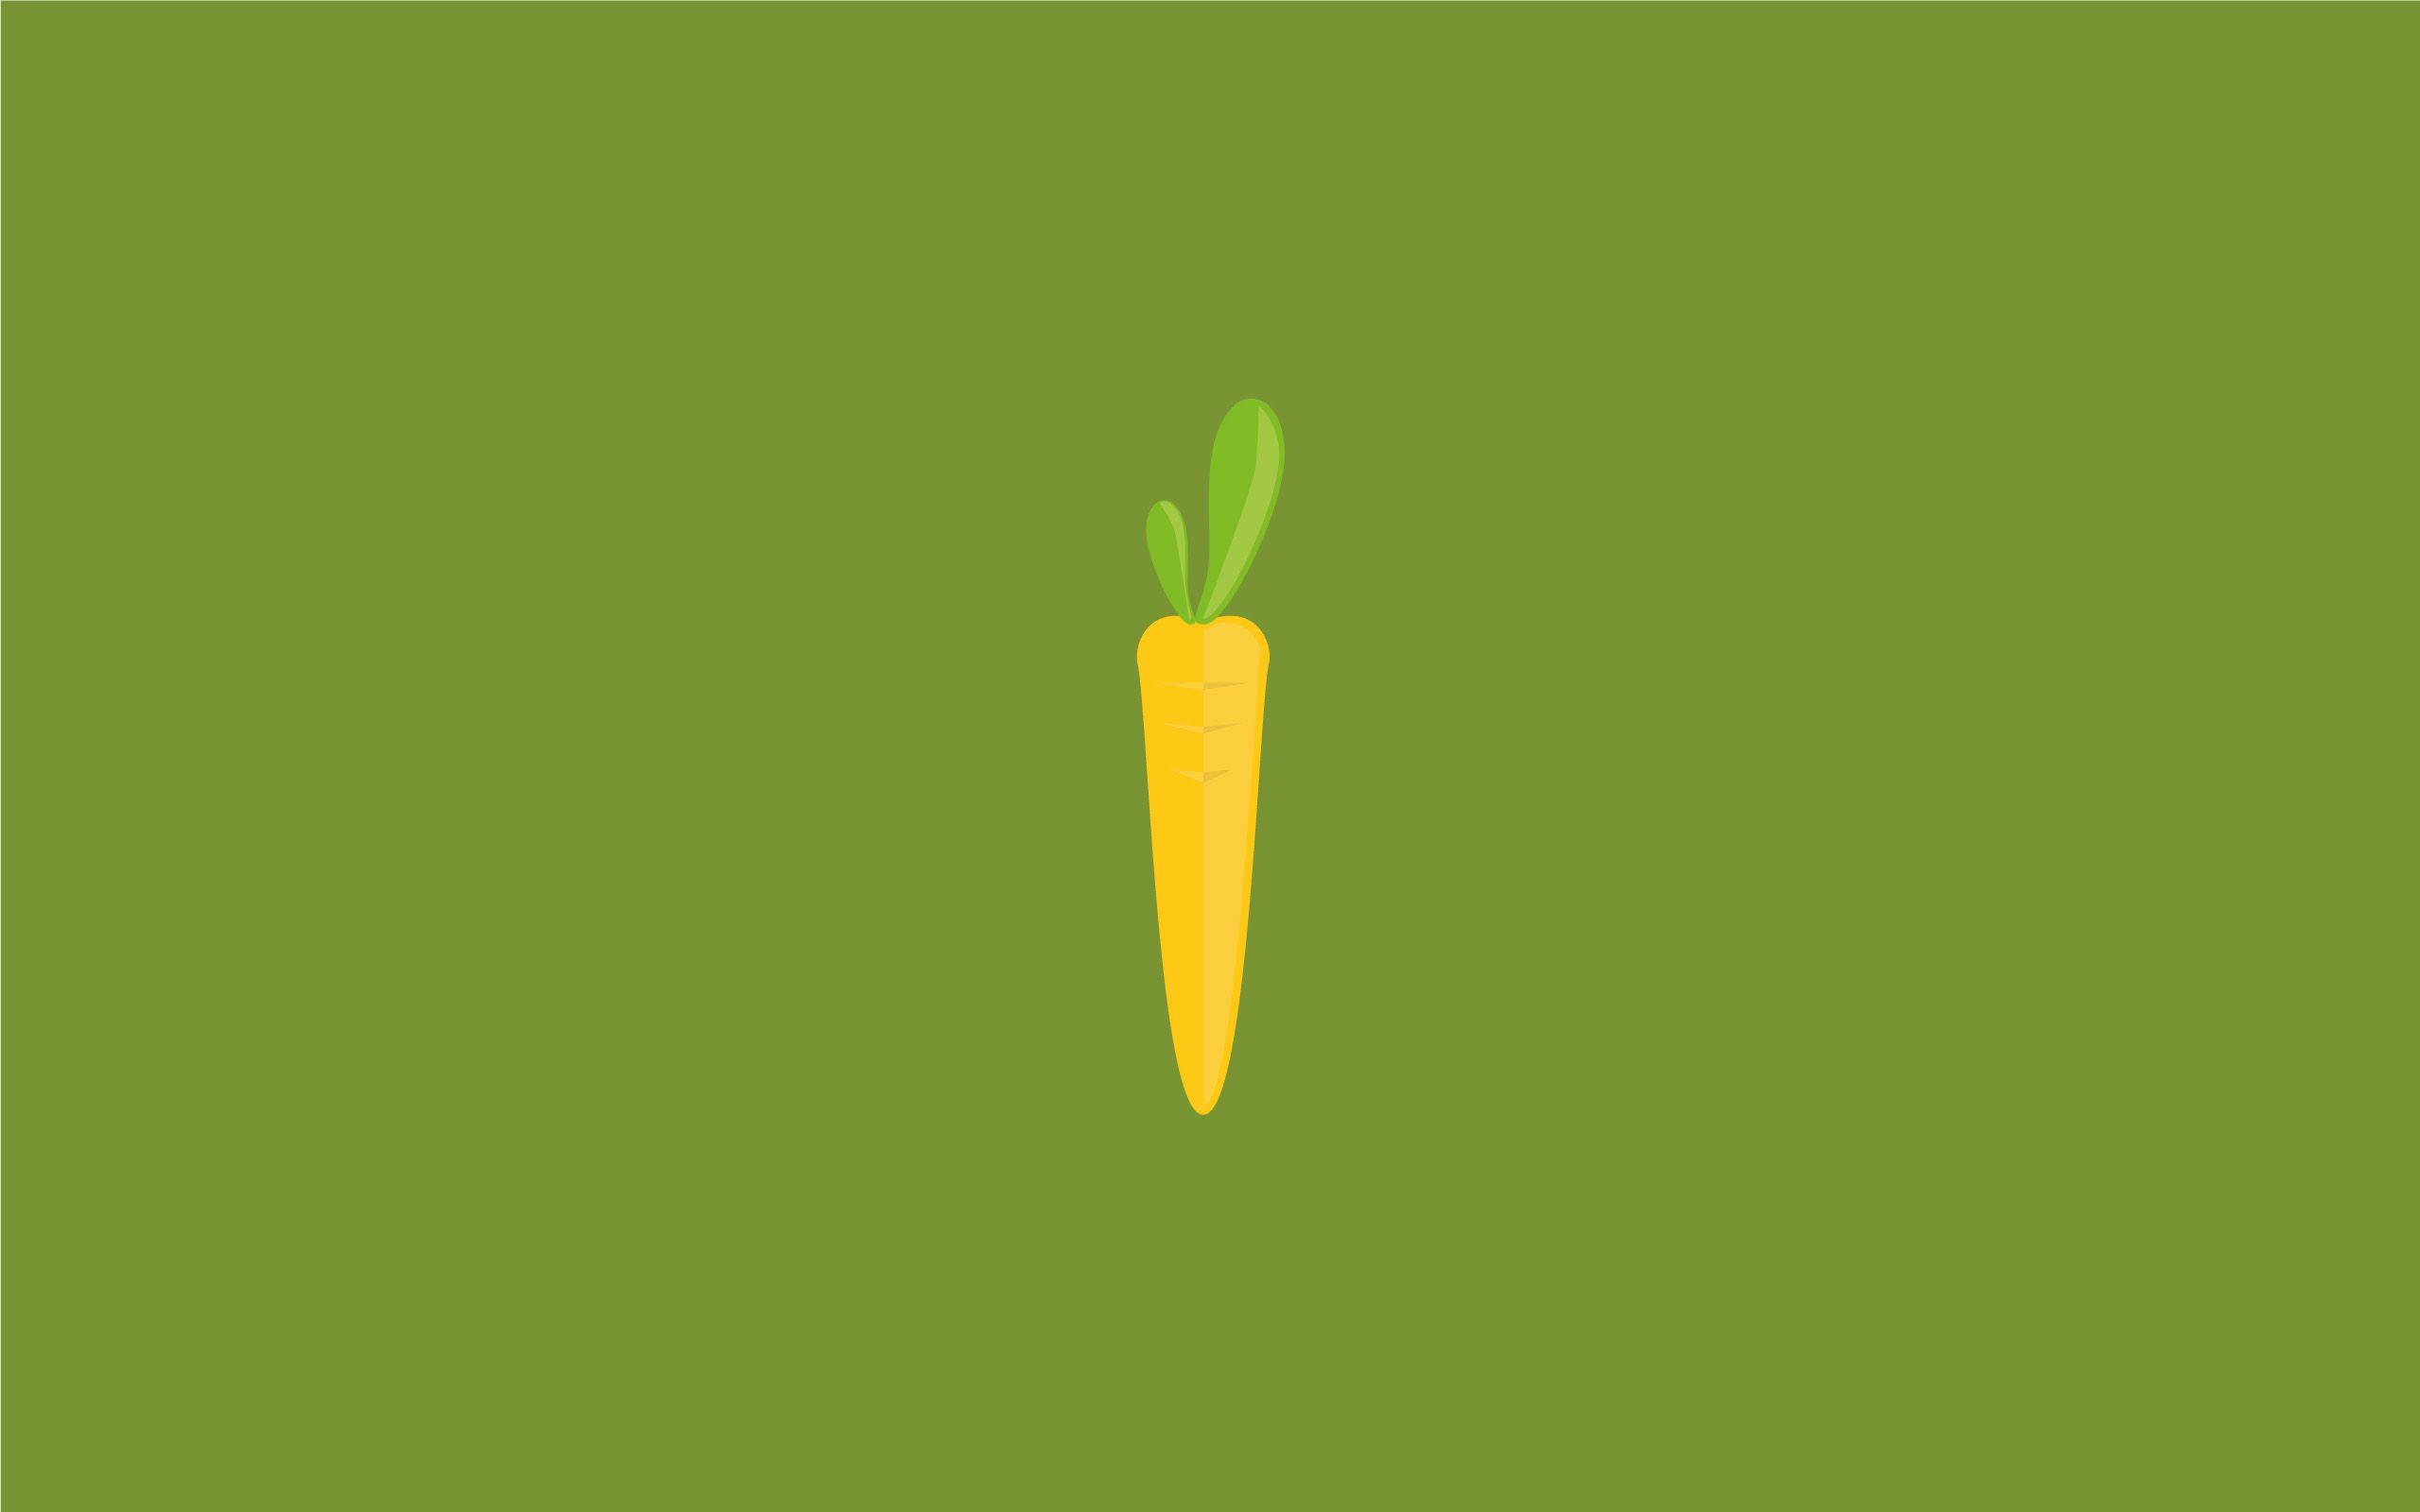 Carrot. Free Desktop Wallpaper for Widescreen, HD and Mobile